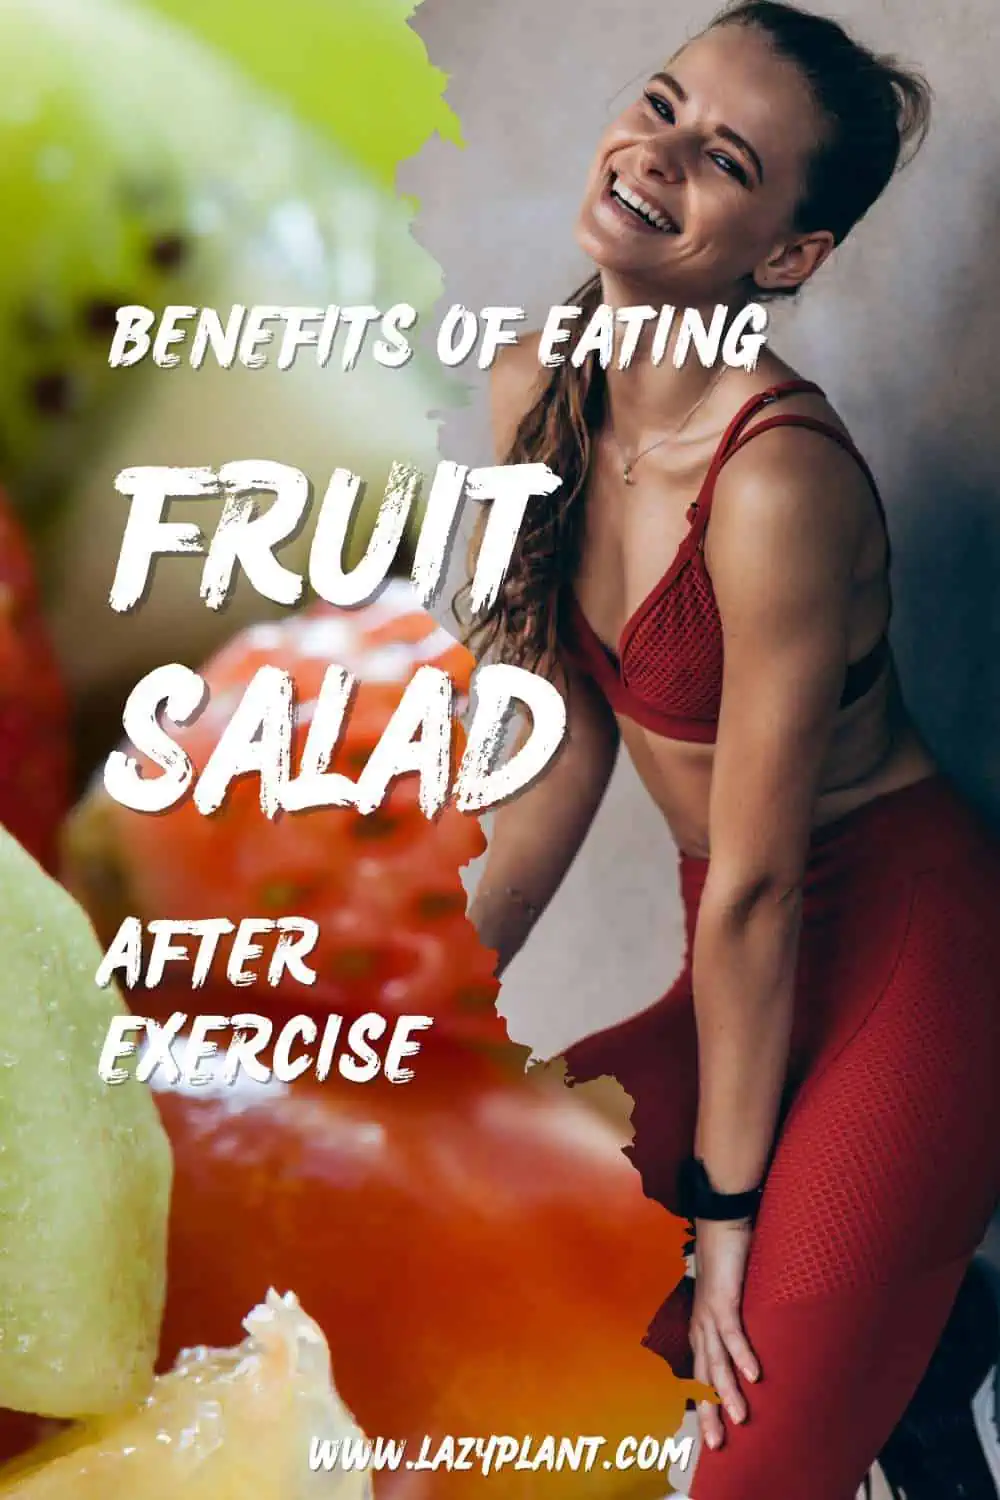 How to eat a fruit salad for muscle recovery & growth?